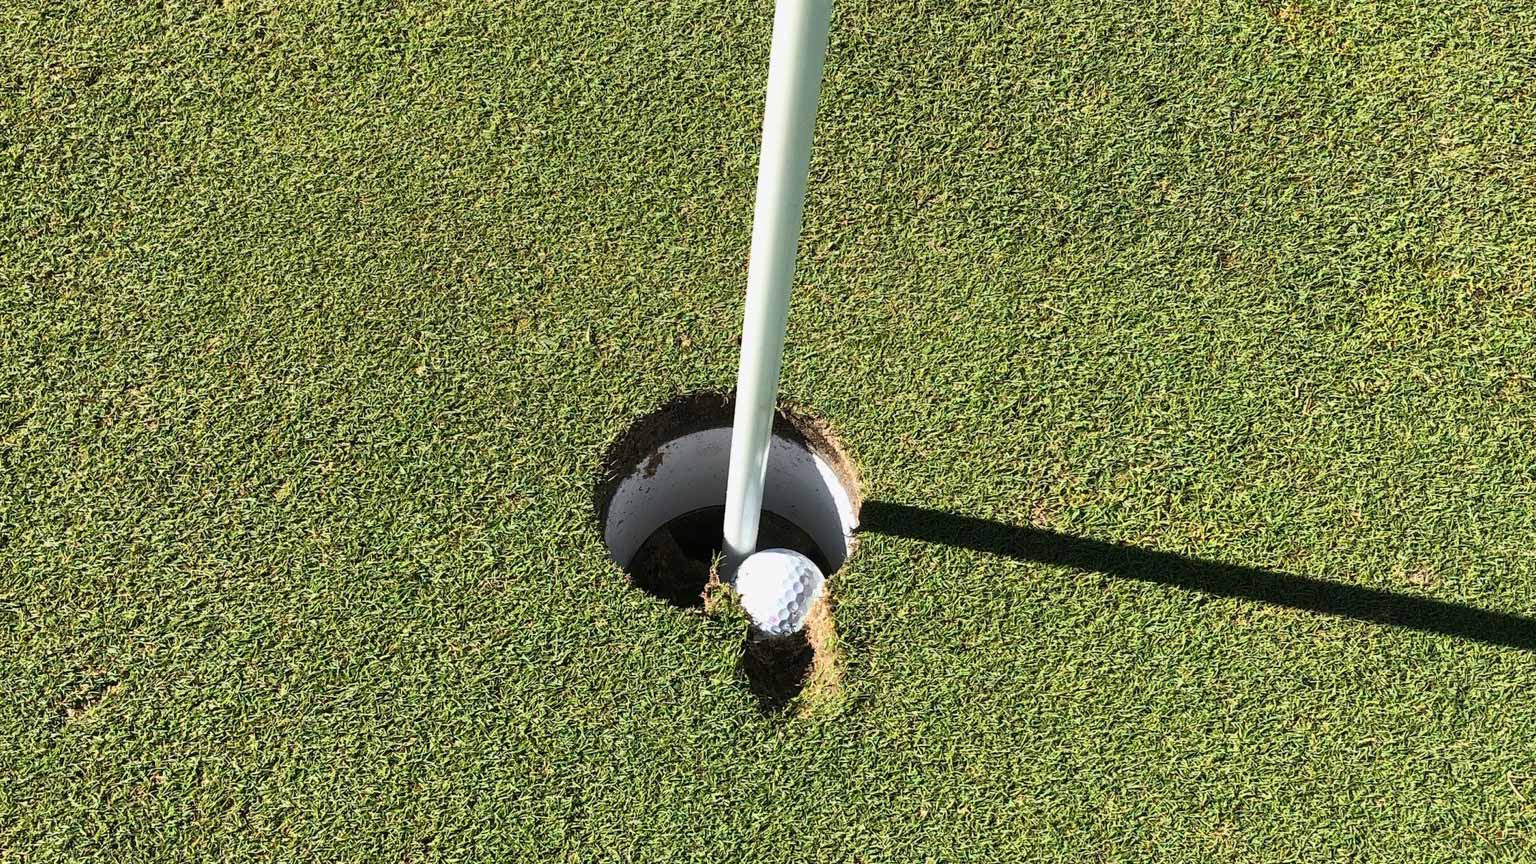 Is this golf ball embedded in the cup a hole-in-one? Here's what we learned